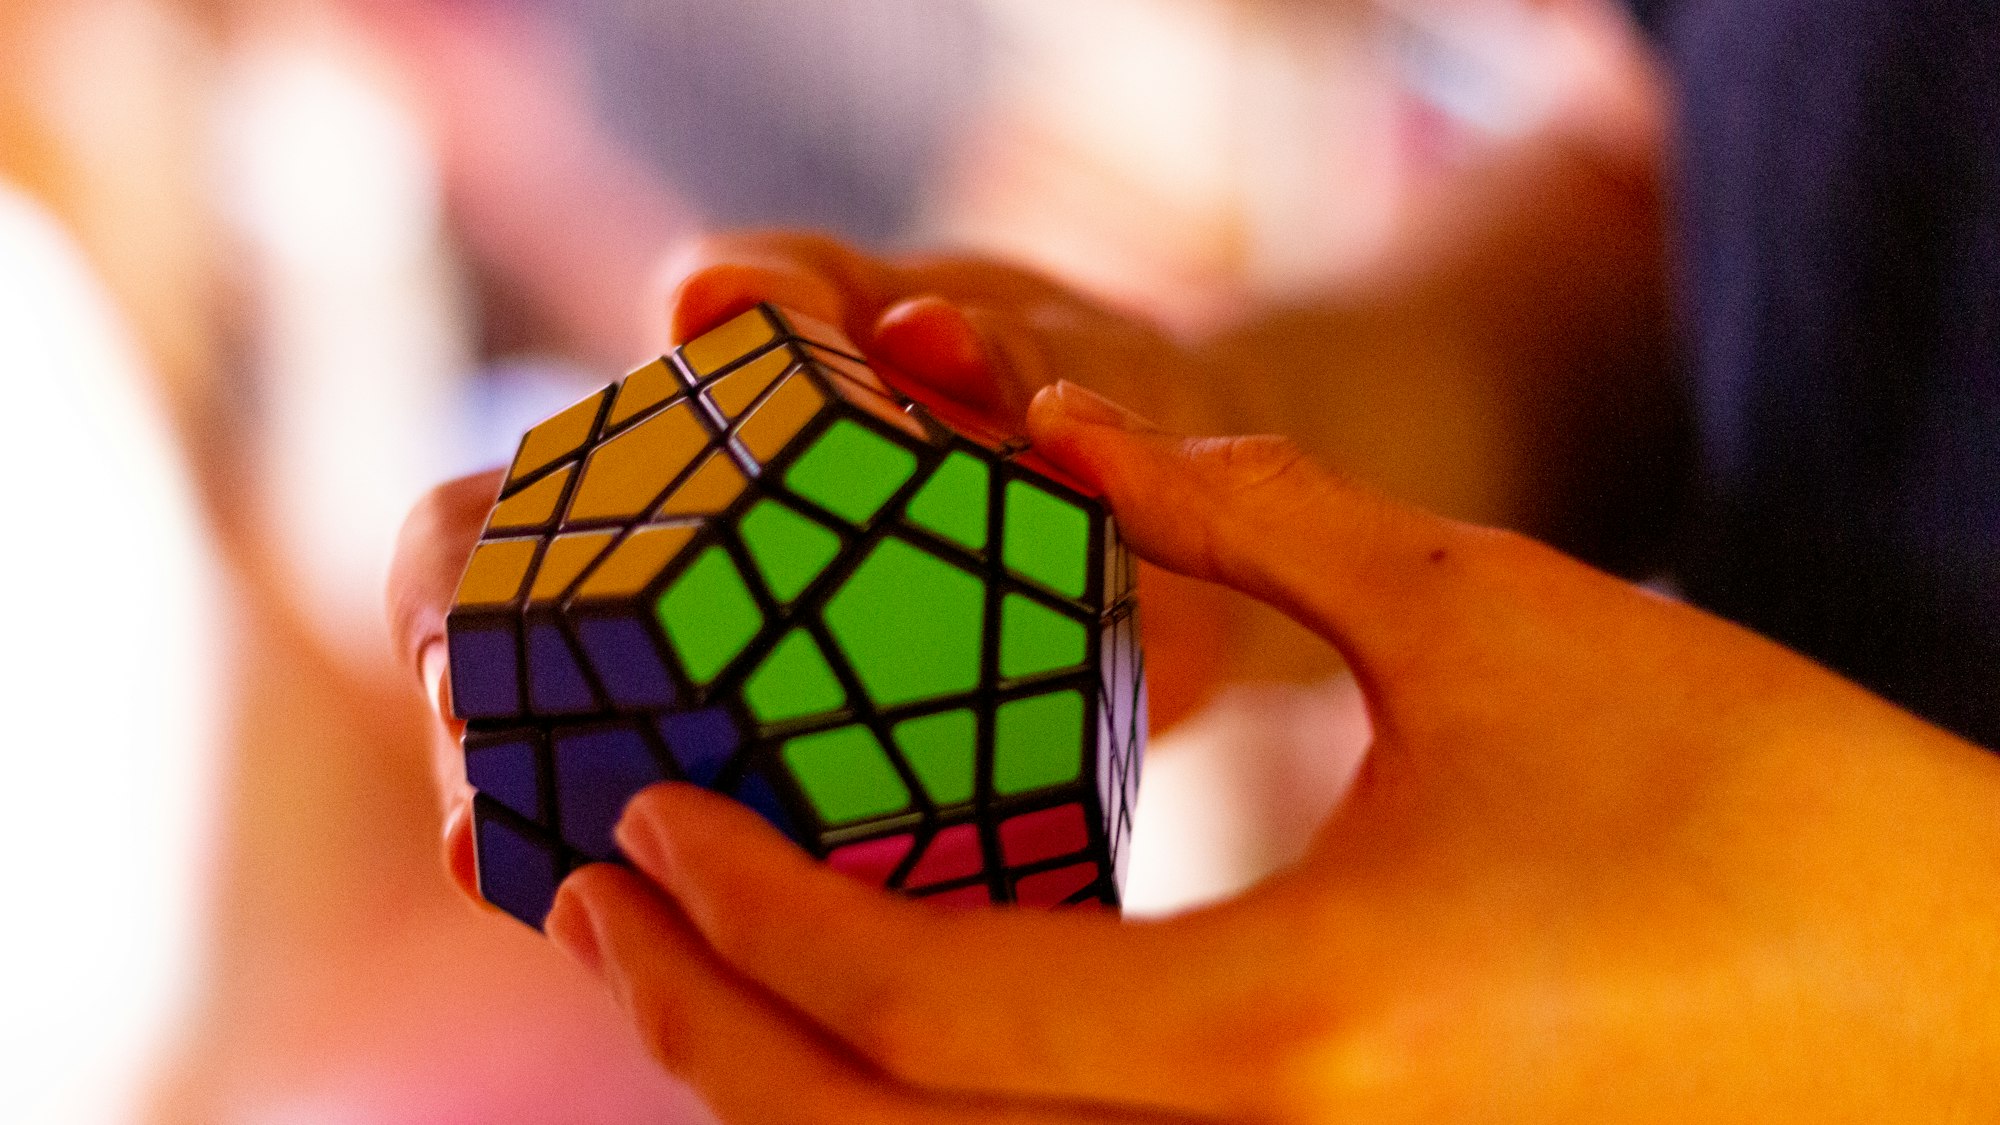 A megaminx (a variation of a Rubik's cube) solved.